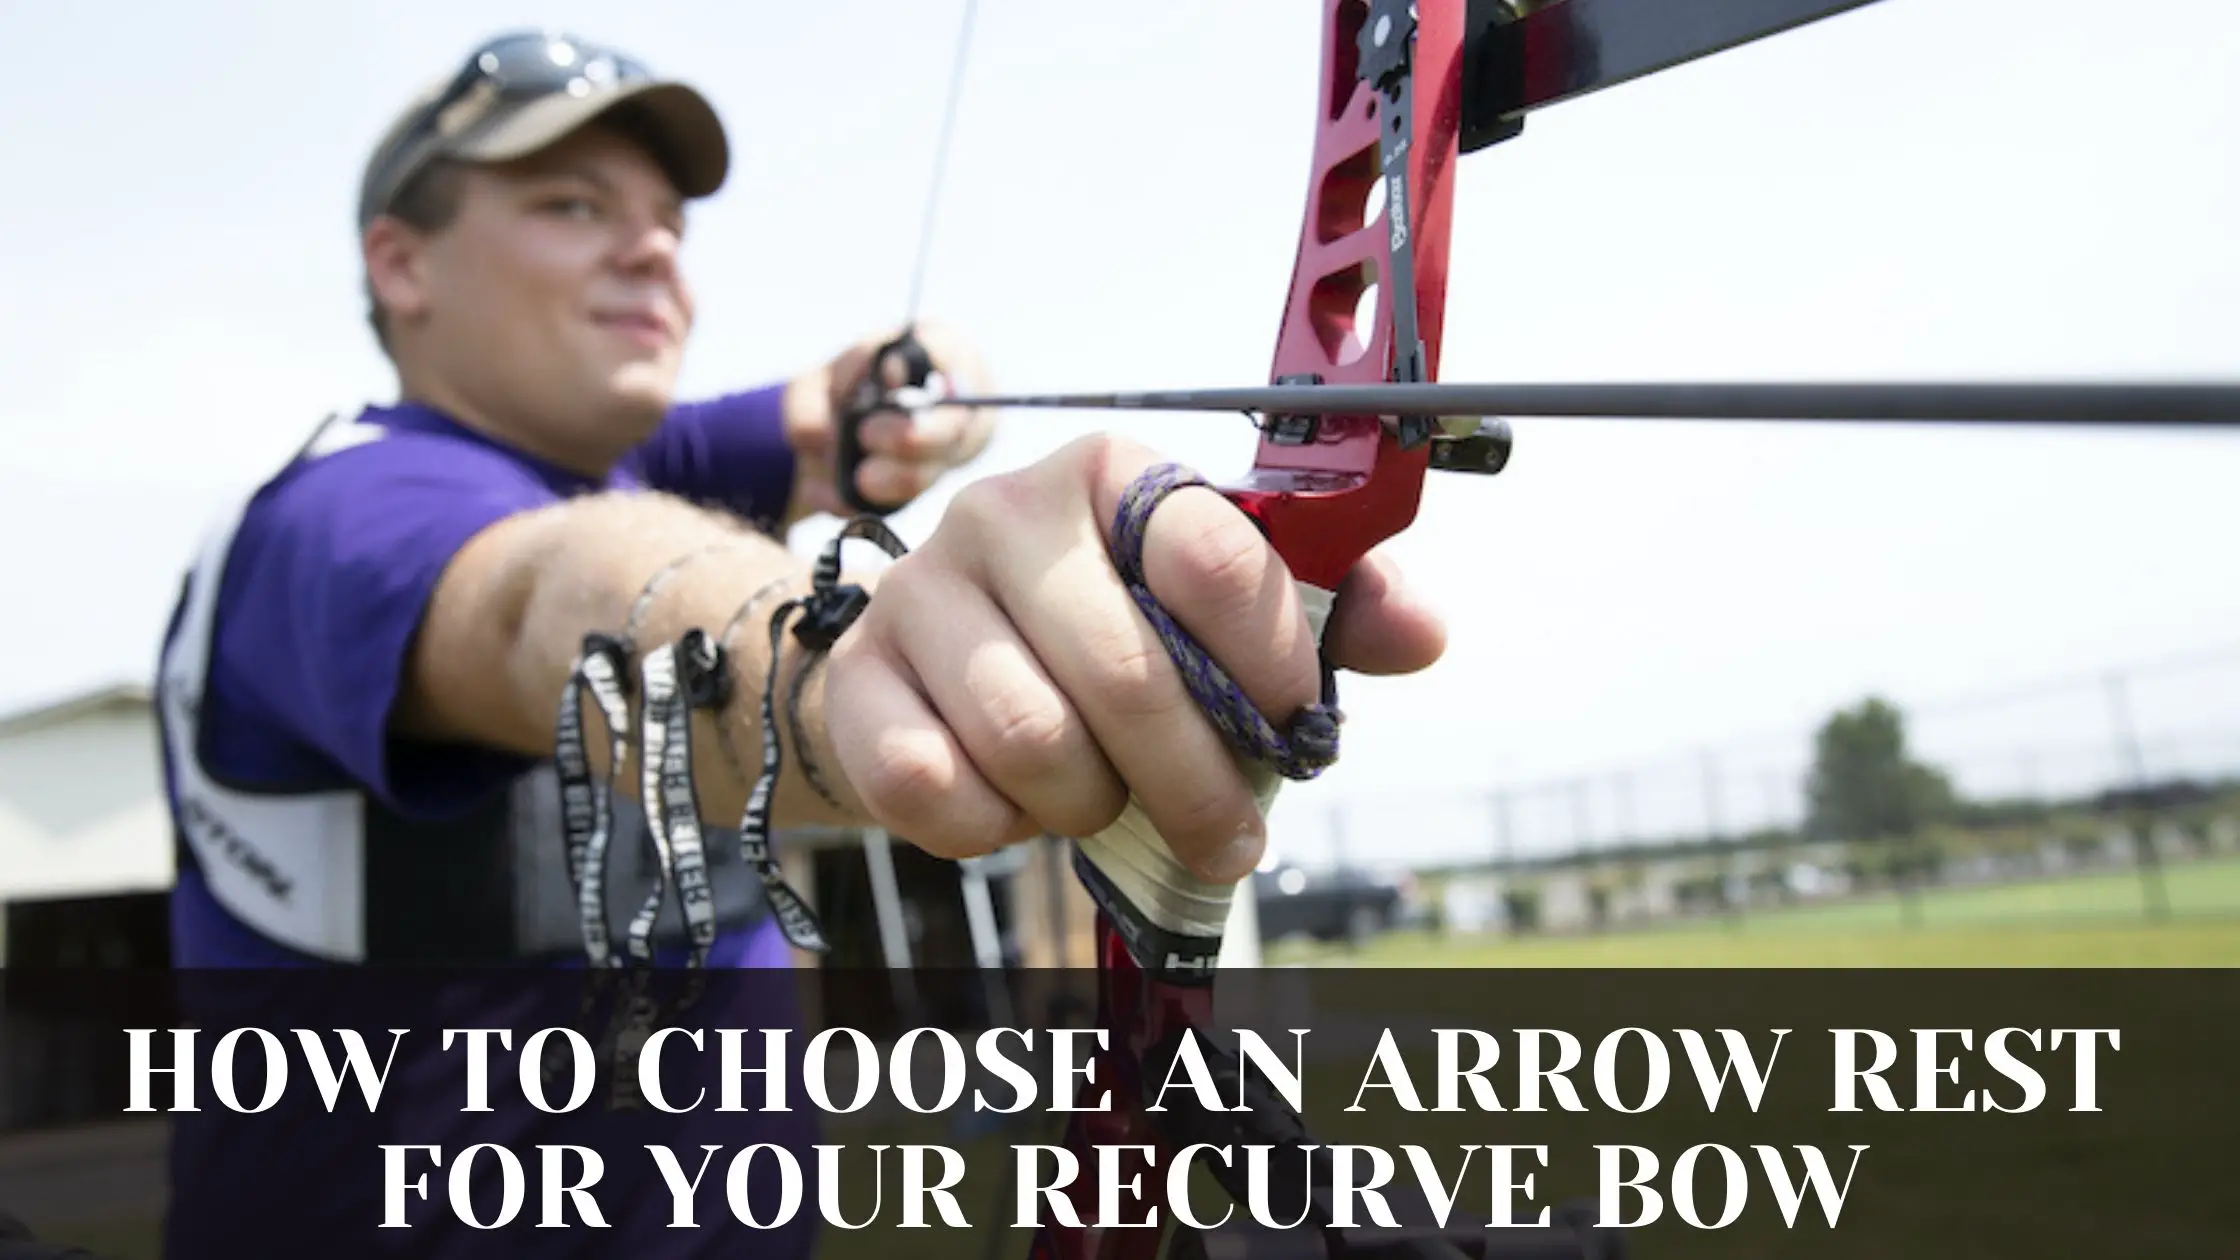 HOW TO CHOOSE AN ARROW REST FOR YOUR RECURVE BOW